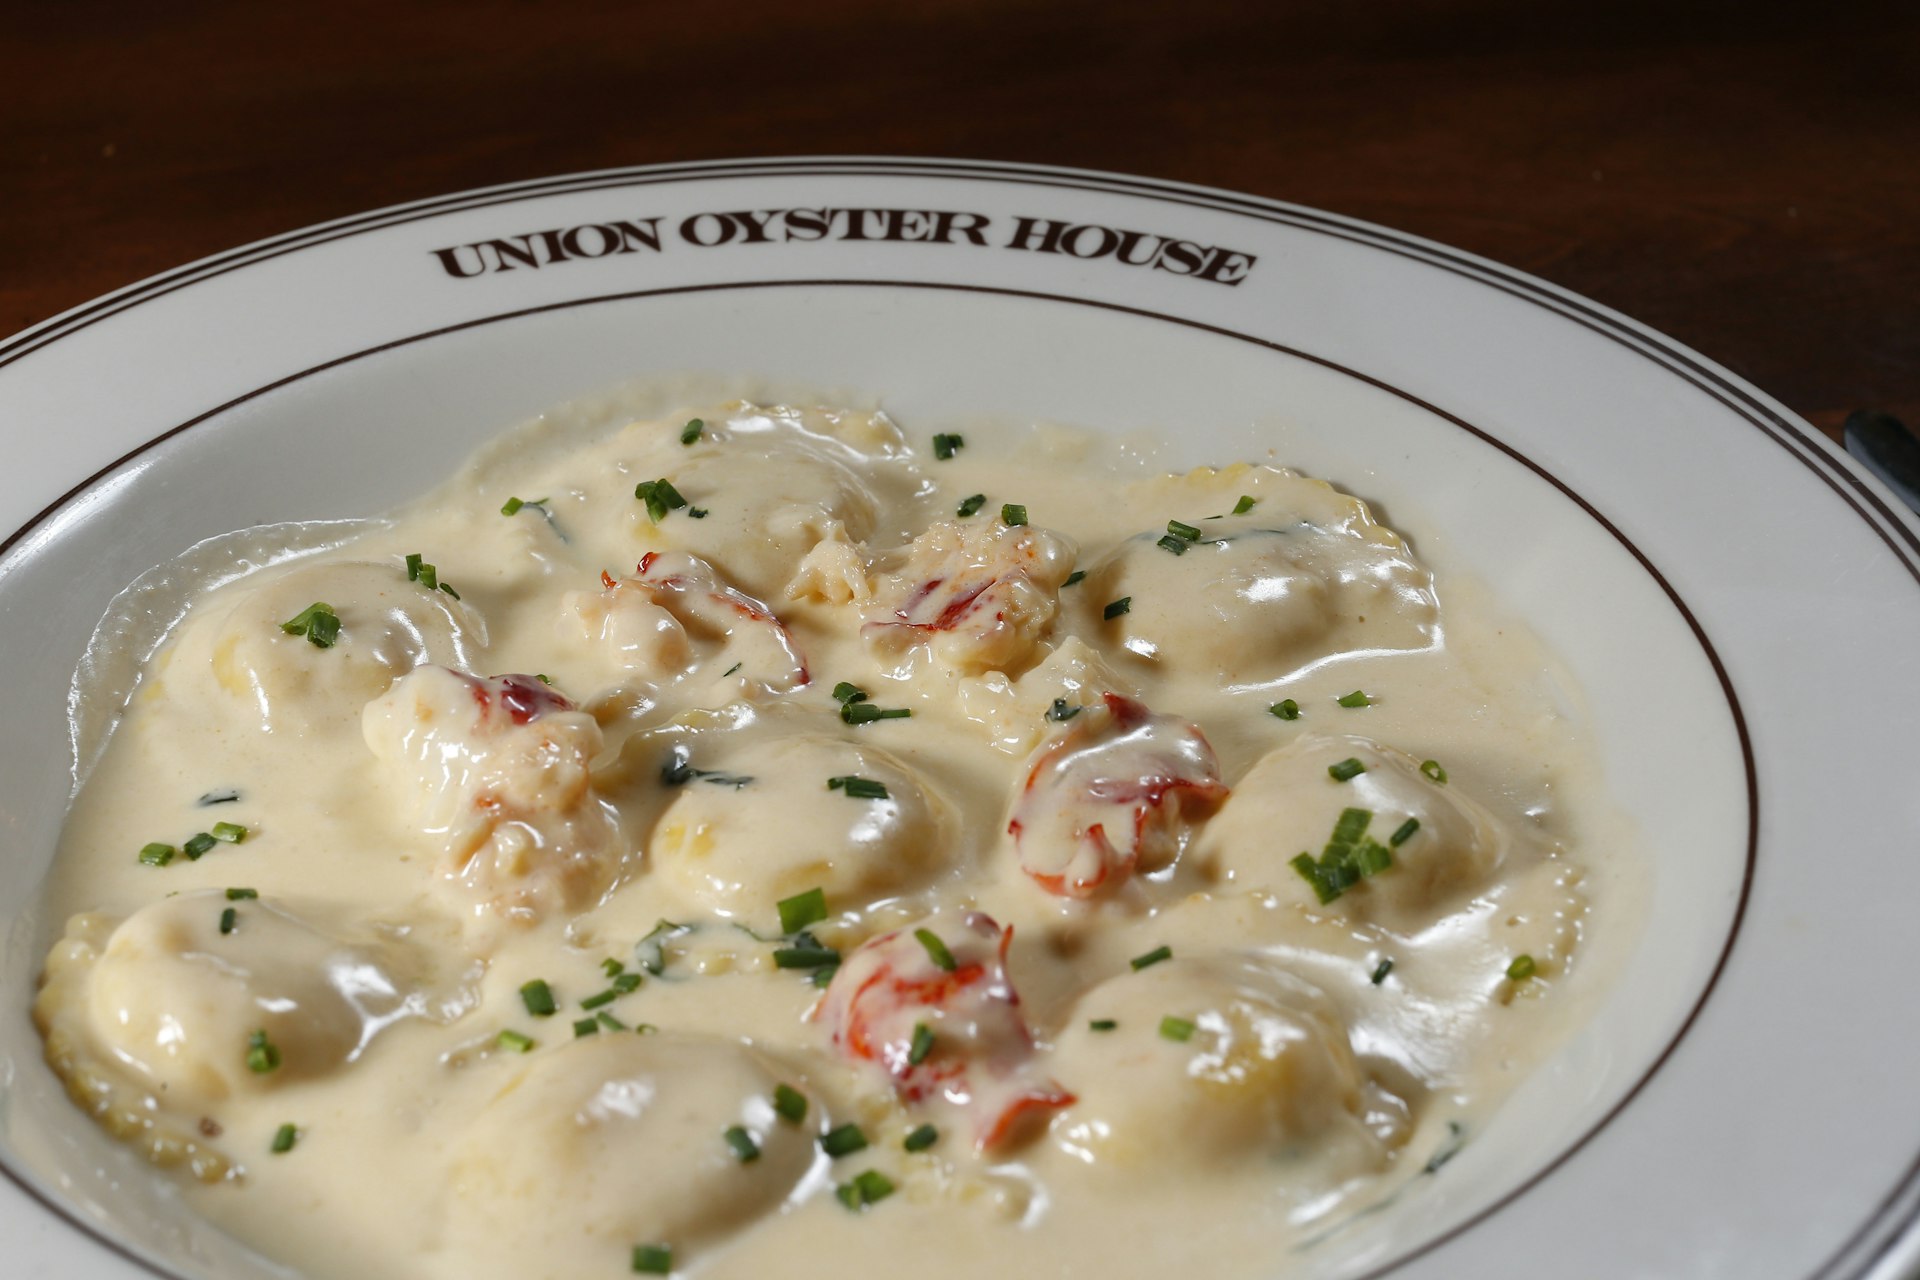 Closeup of a plate of lobster ravioli at the Union Oyster House in Boston